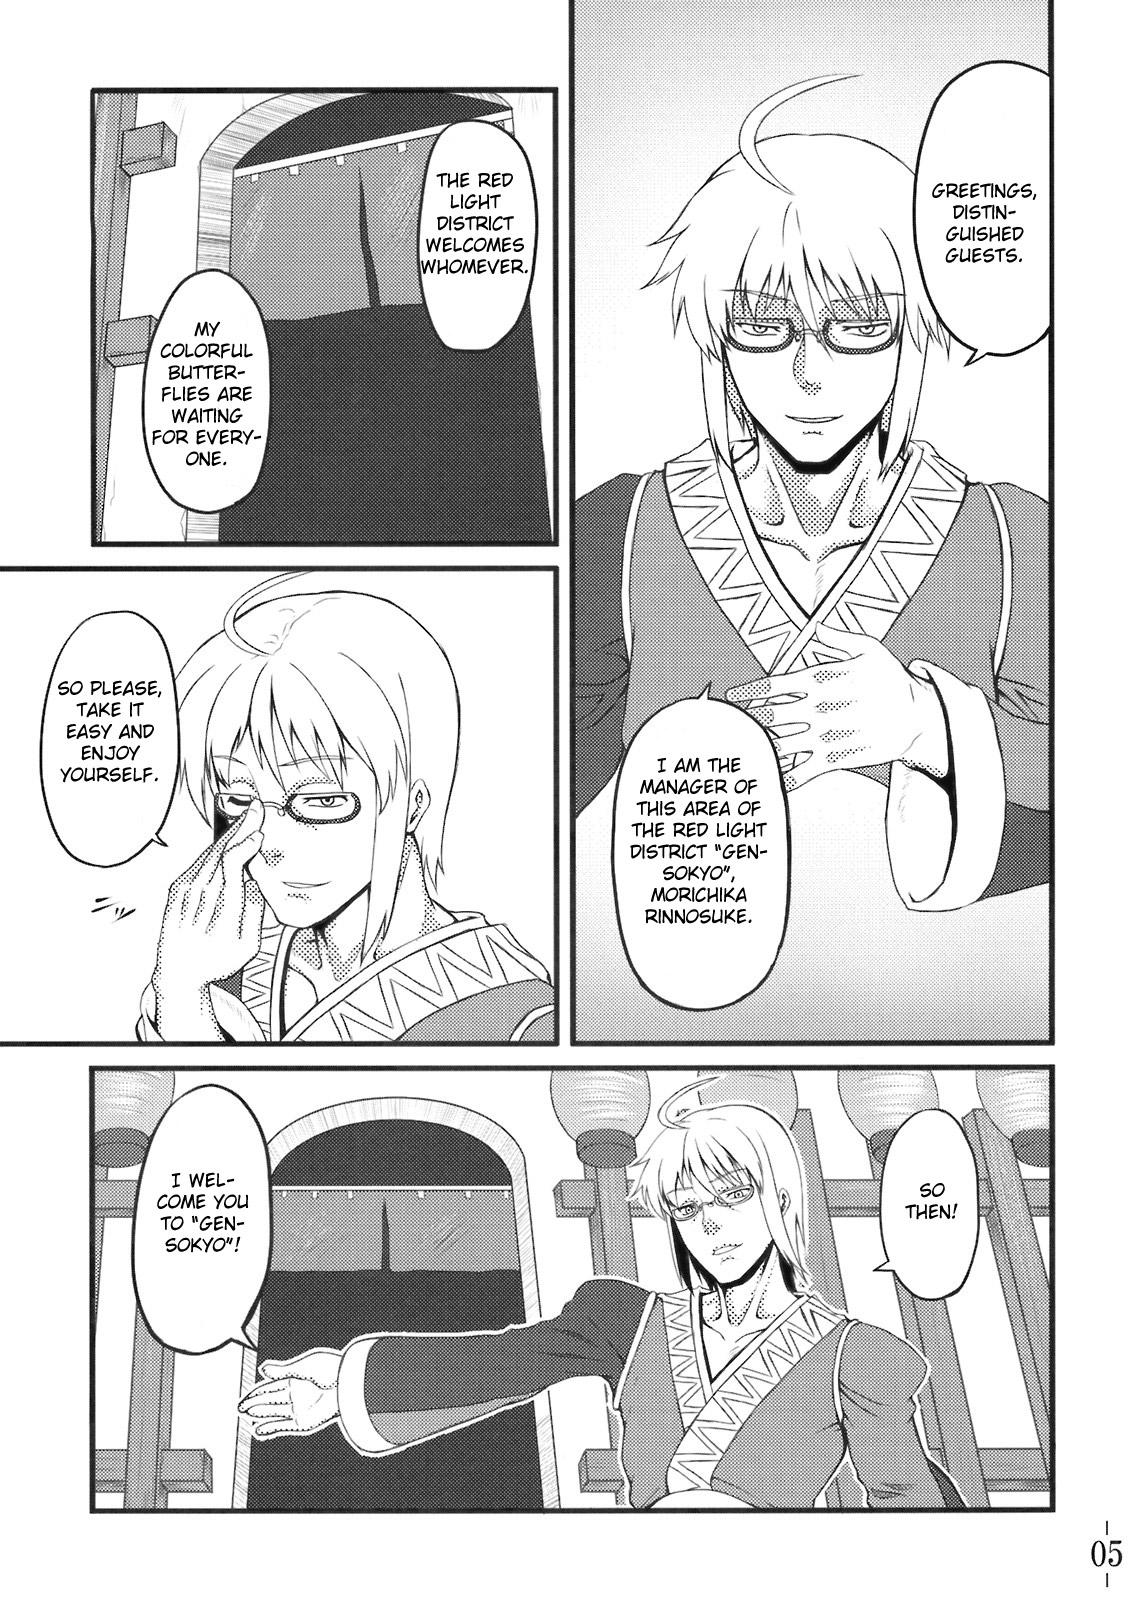 Old And Young Touhou Yuukaku "Gensoukyou" e Youkoso | Welcome to Gensokyo Touhou Red Light District - Touhou project Teamskeet - Page 6